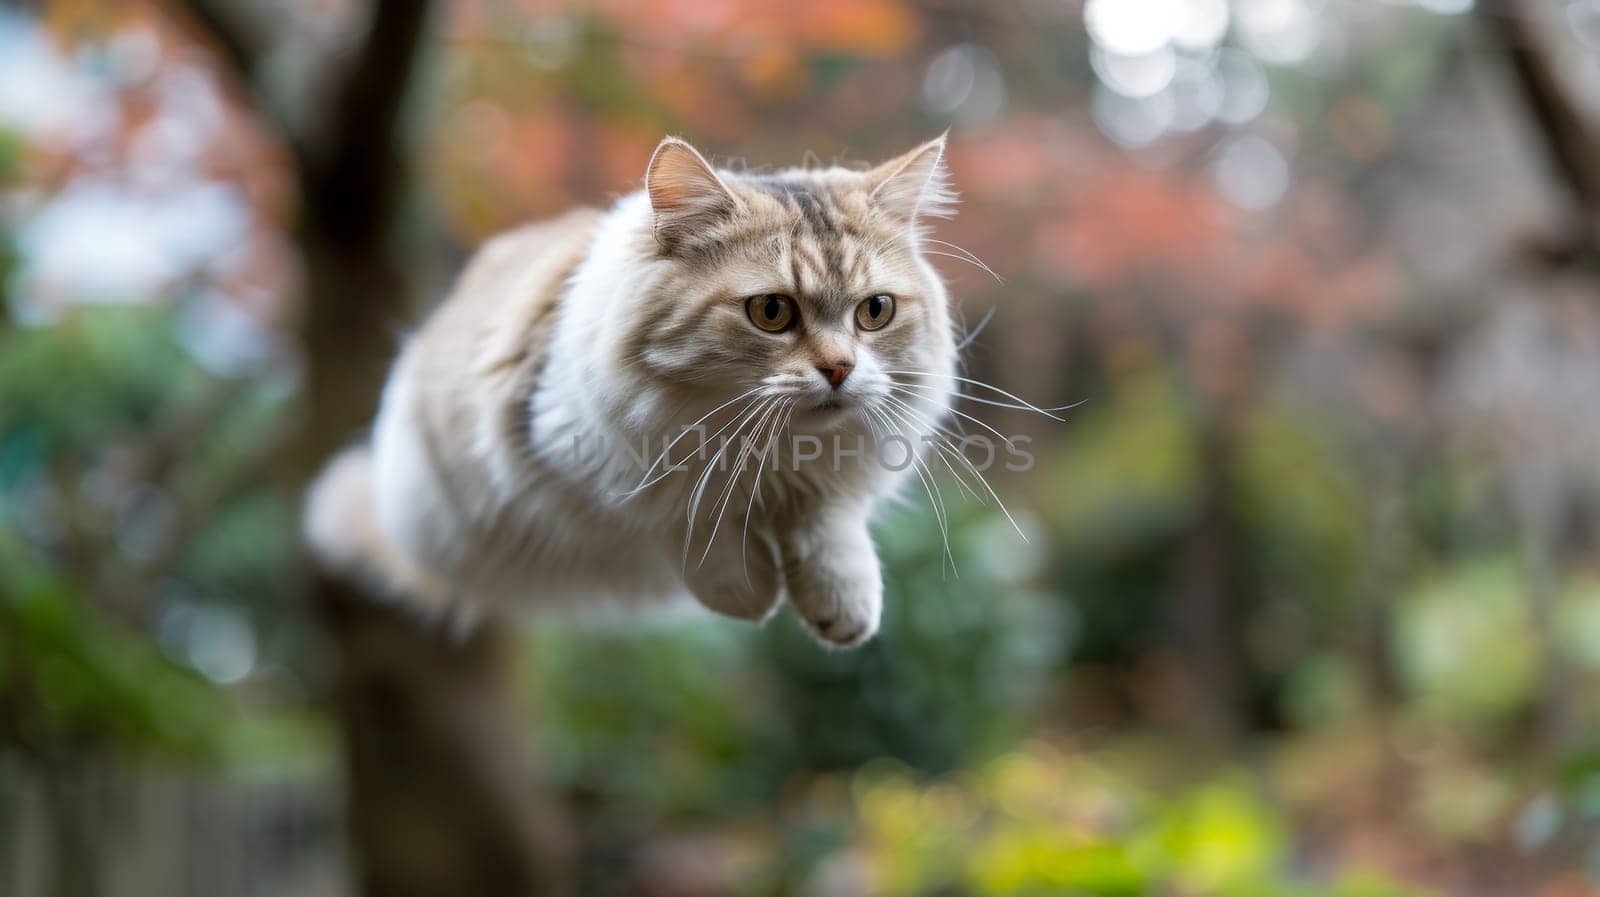 A cat flying through the air in front of a tree